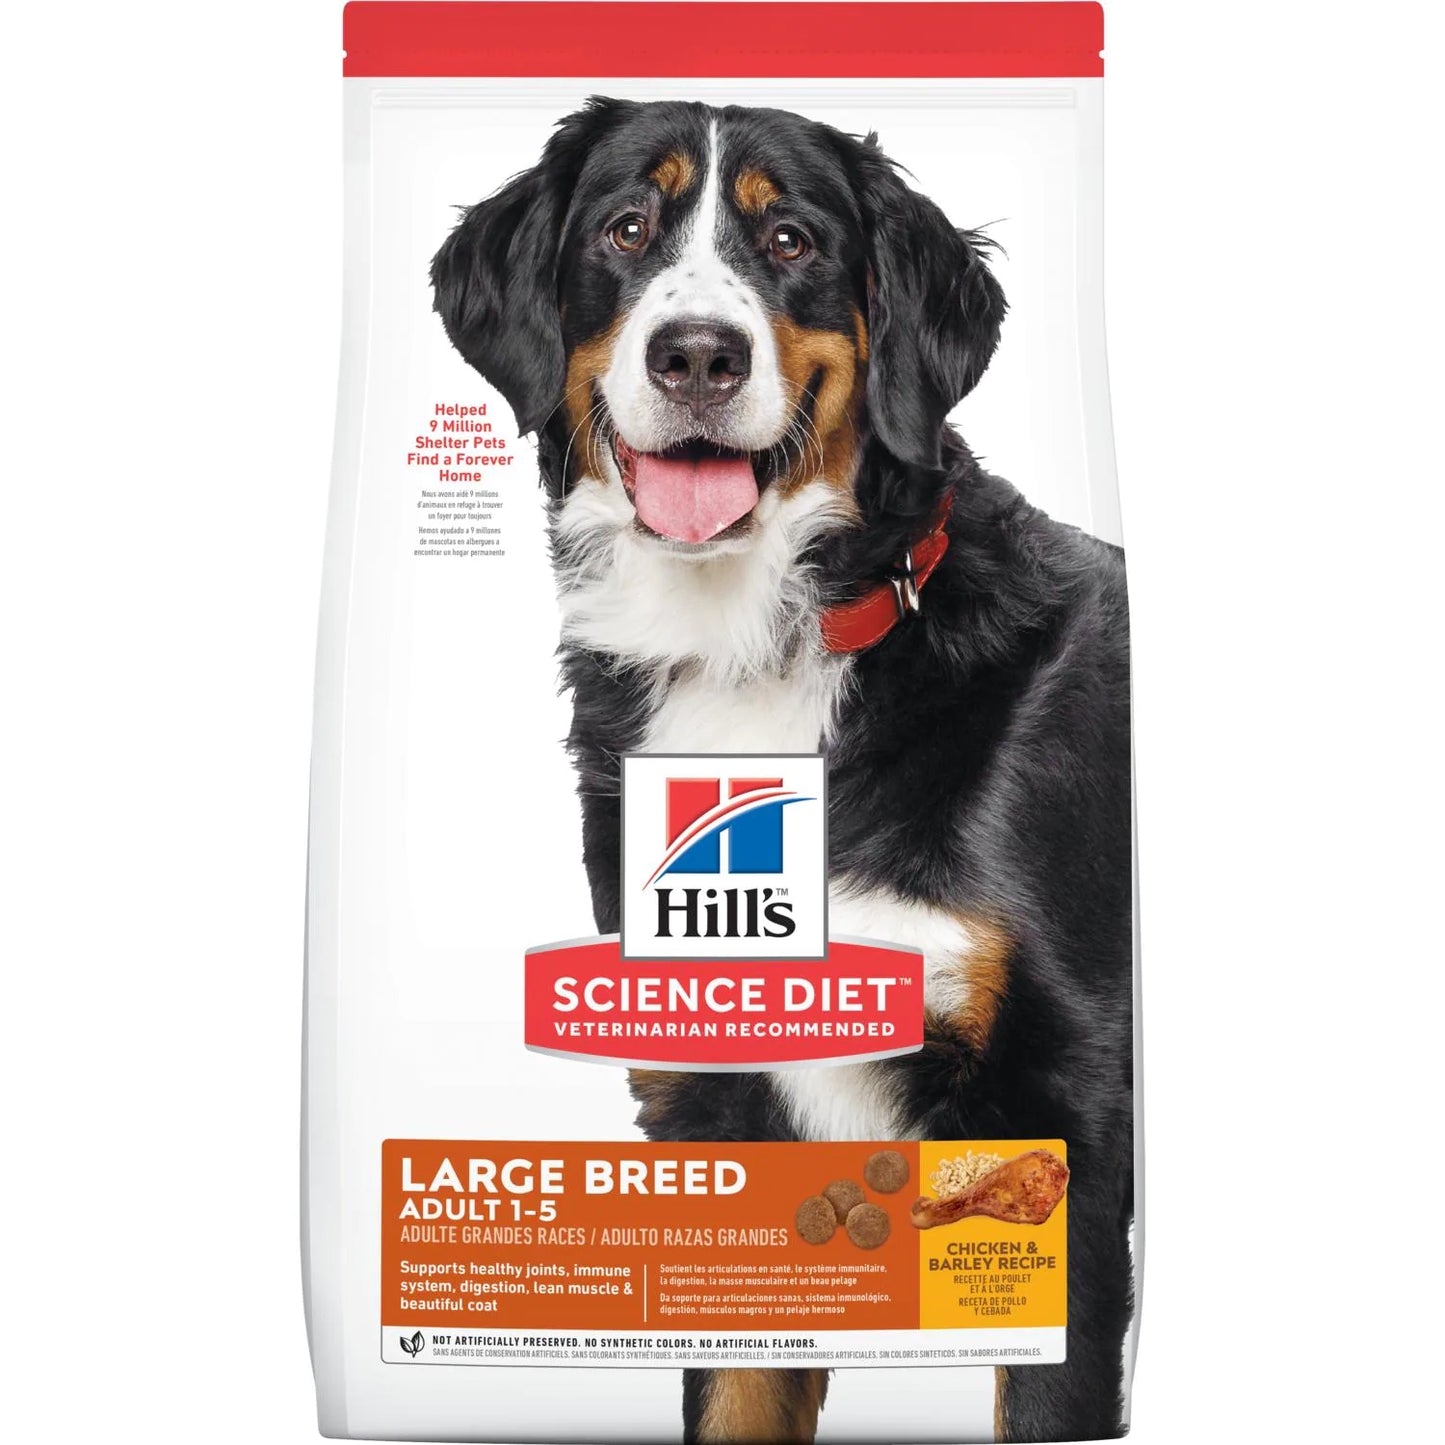 Hill's Science Diet Adult Large Breed Chicken & Barley Recipe dog food